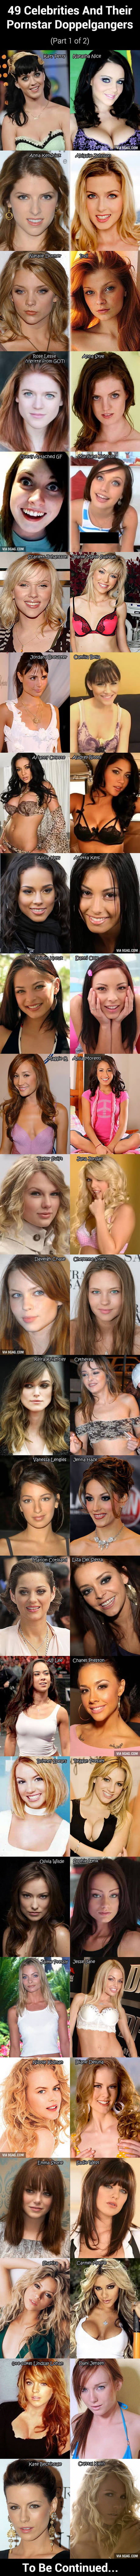 Celebrity Porn Doppelgangers - 49 Celebrities And Their Pornstar Doppelgangers (Part 1 of 2) - 9GAG